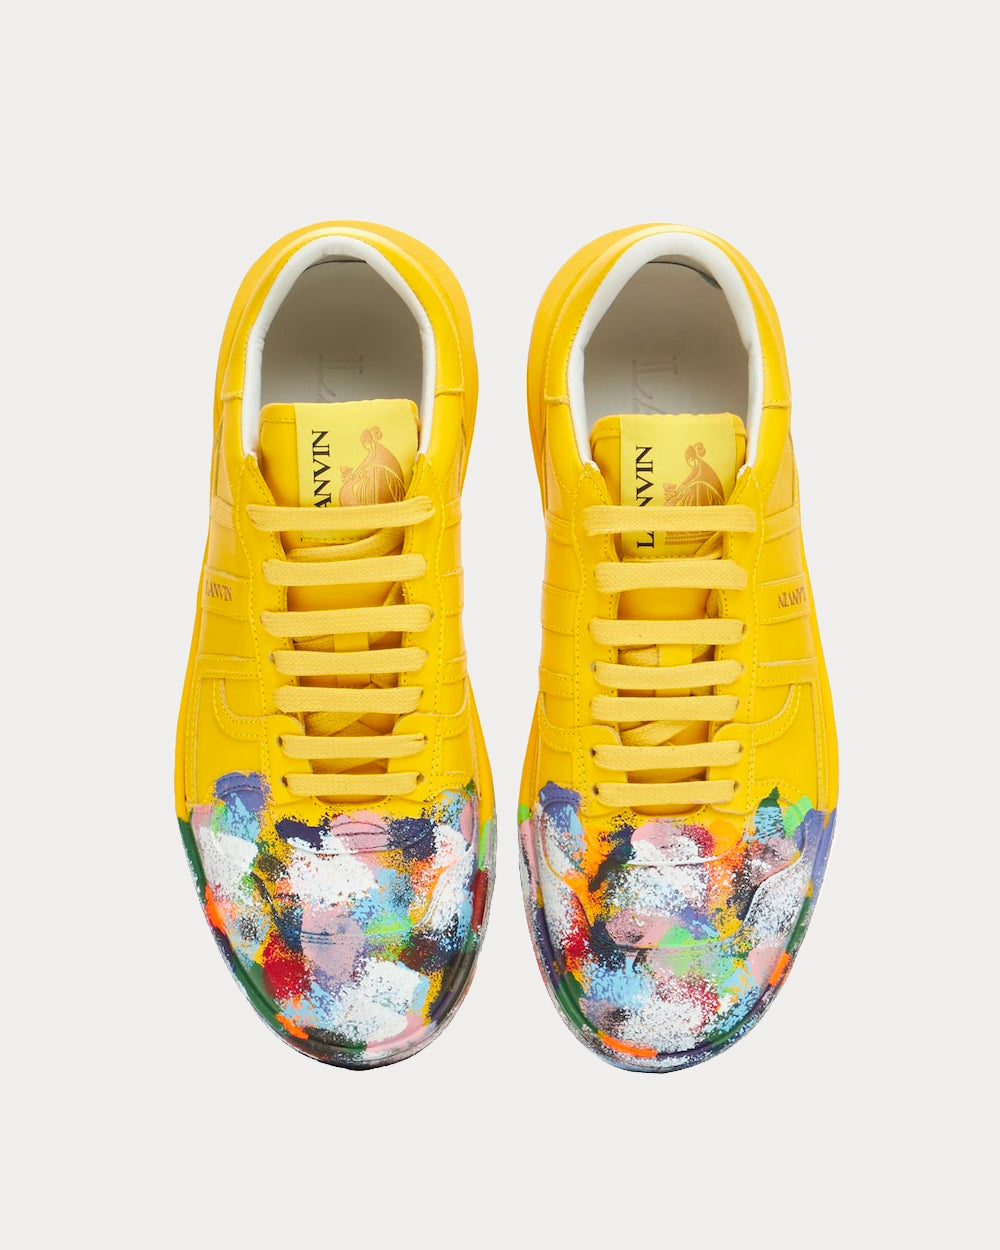 Lanvin x Gallery Dept Clay Painted Yellow Low Top Sneakers - Sneak in Peace